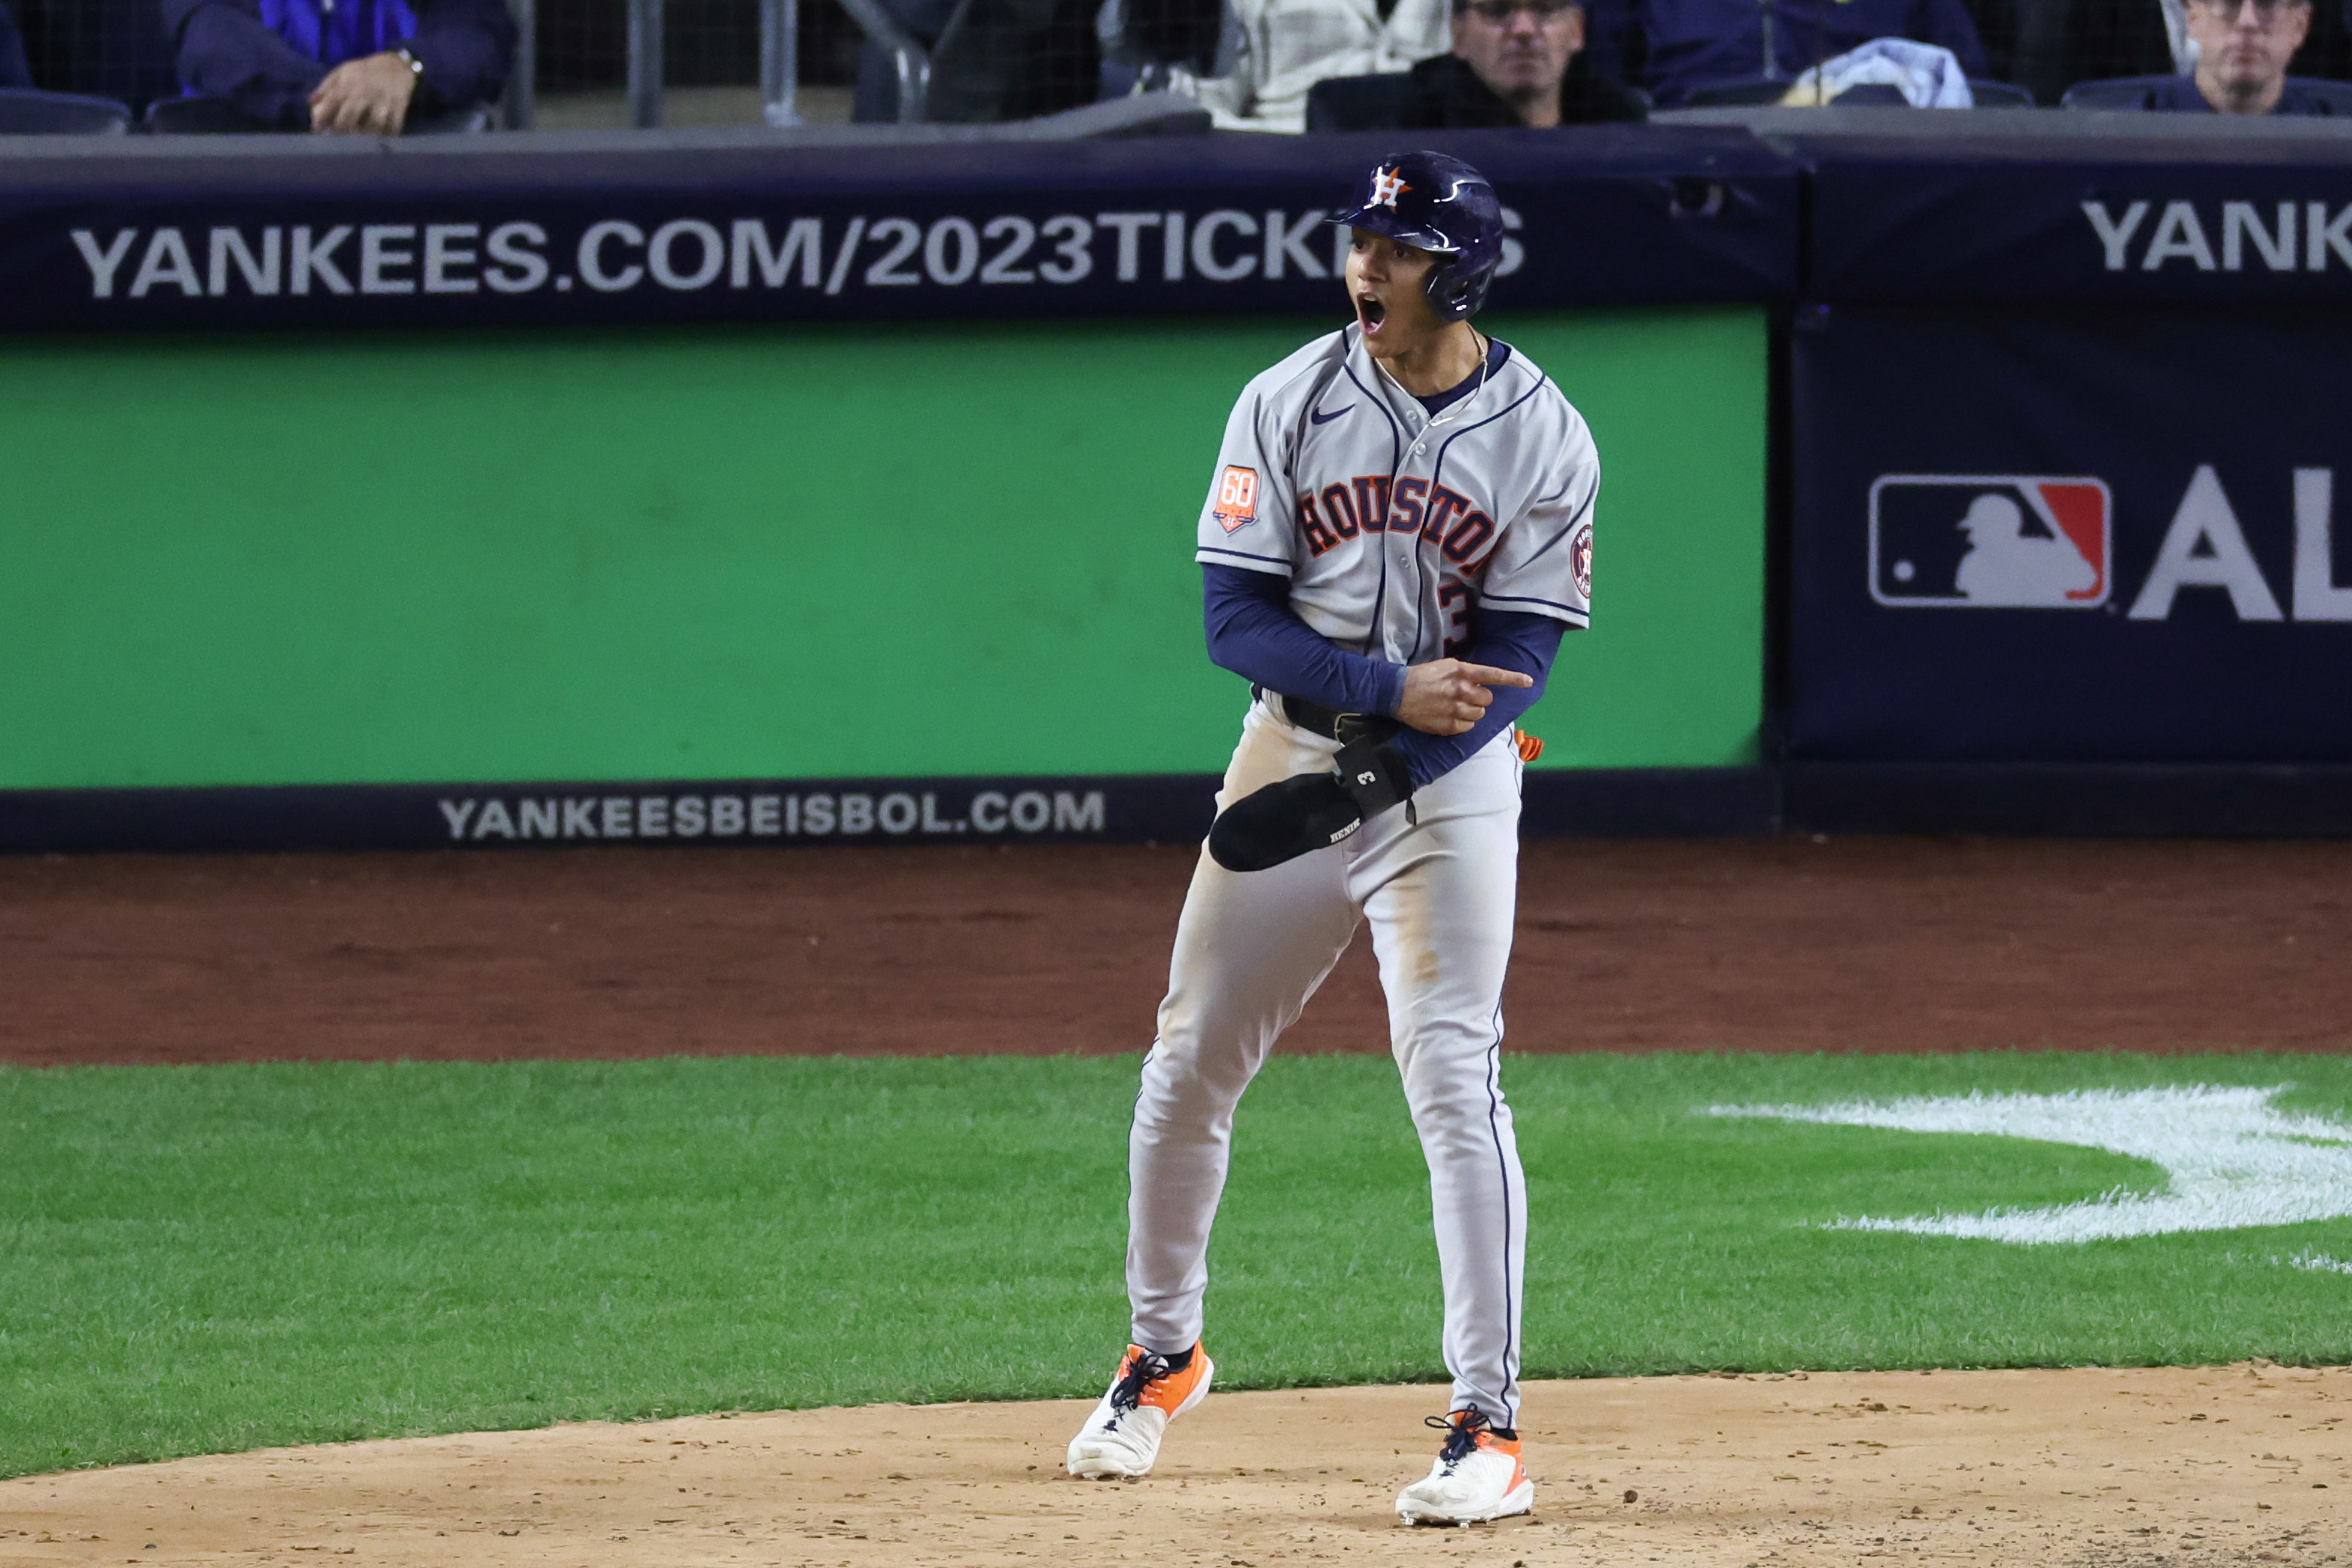 Houston Astros sweep Yankees in ALCS, advance to World Series again